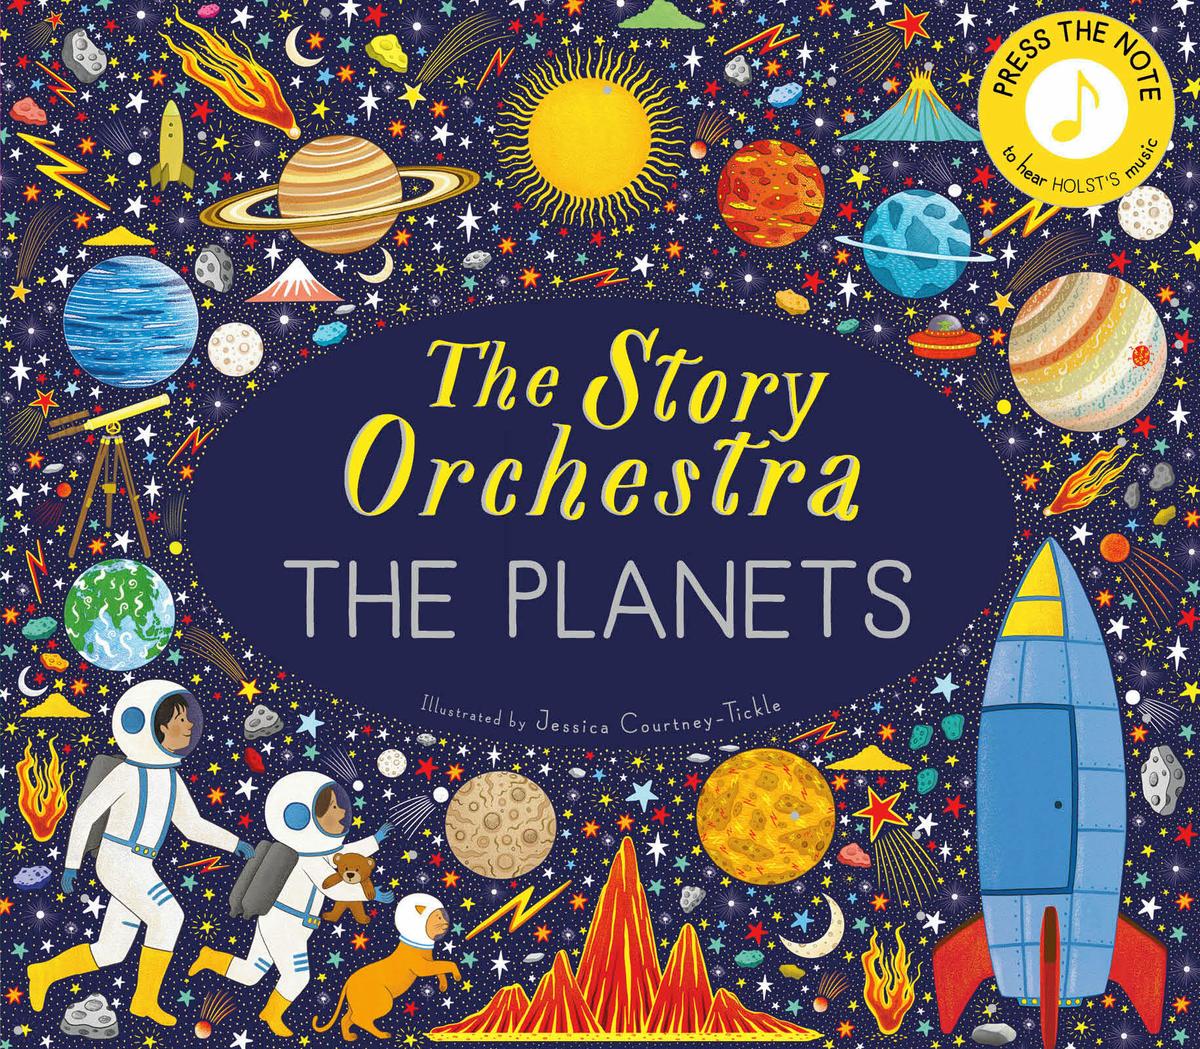 The Story Orchestra - The Planets: Press the note to hear Holst's music